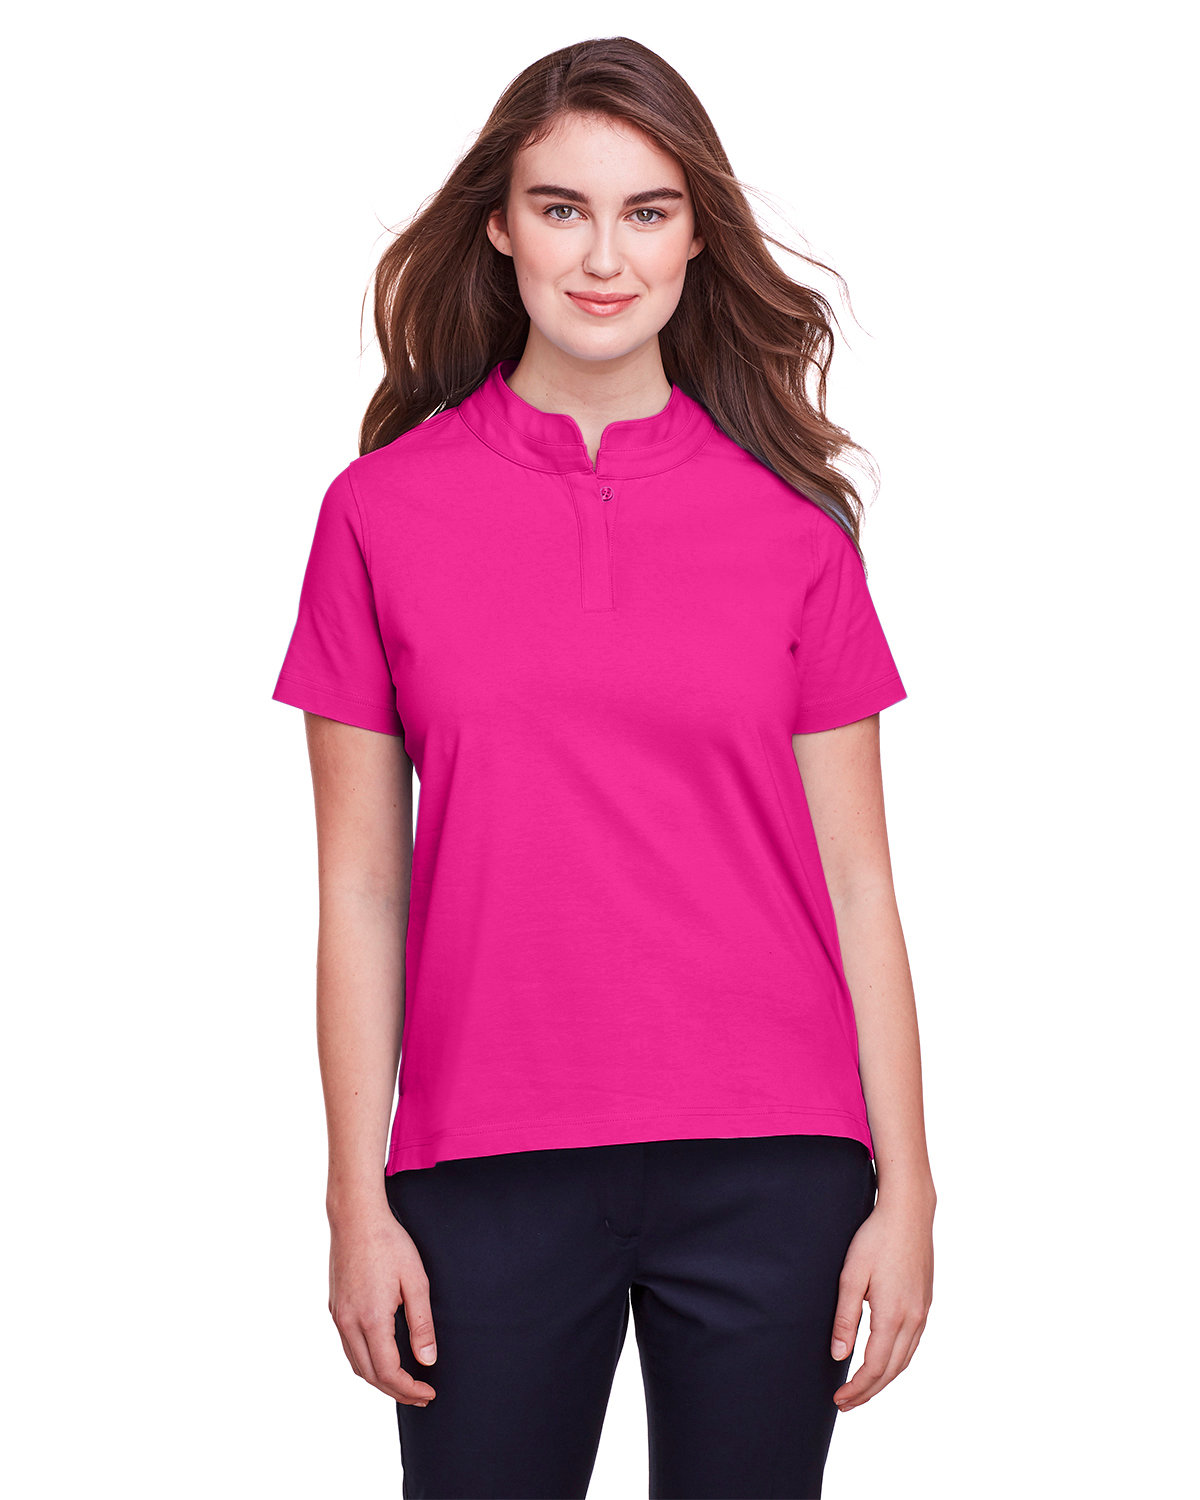 UltraClub Ladies' Lakeshore Stretch Cotton Performance Polo heliconia 